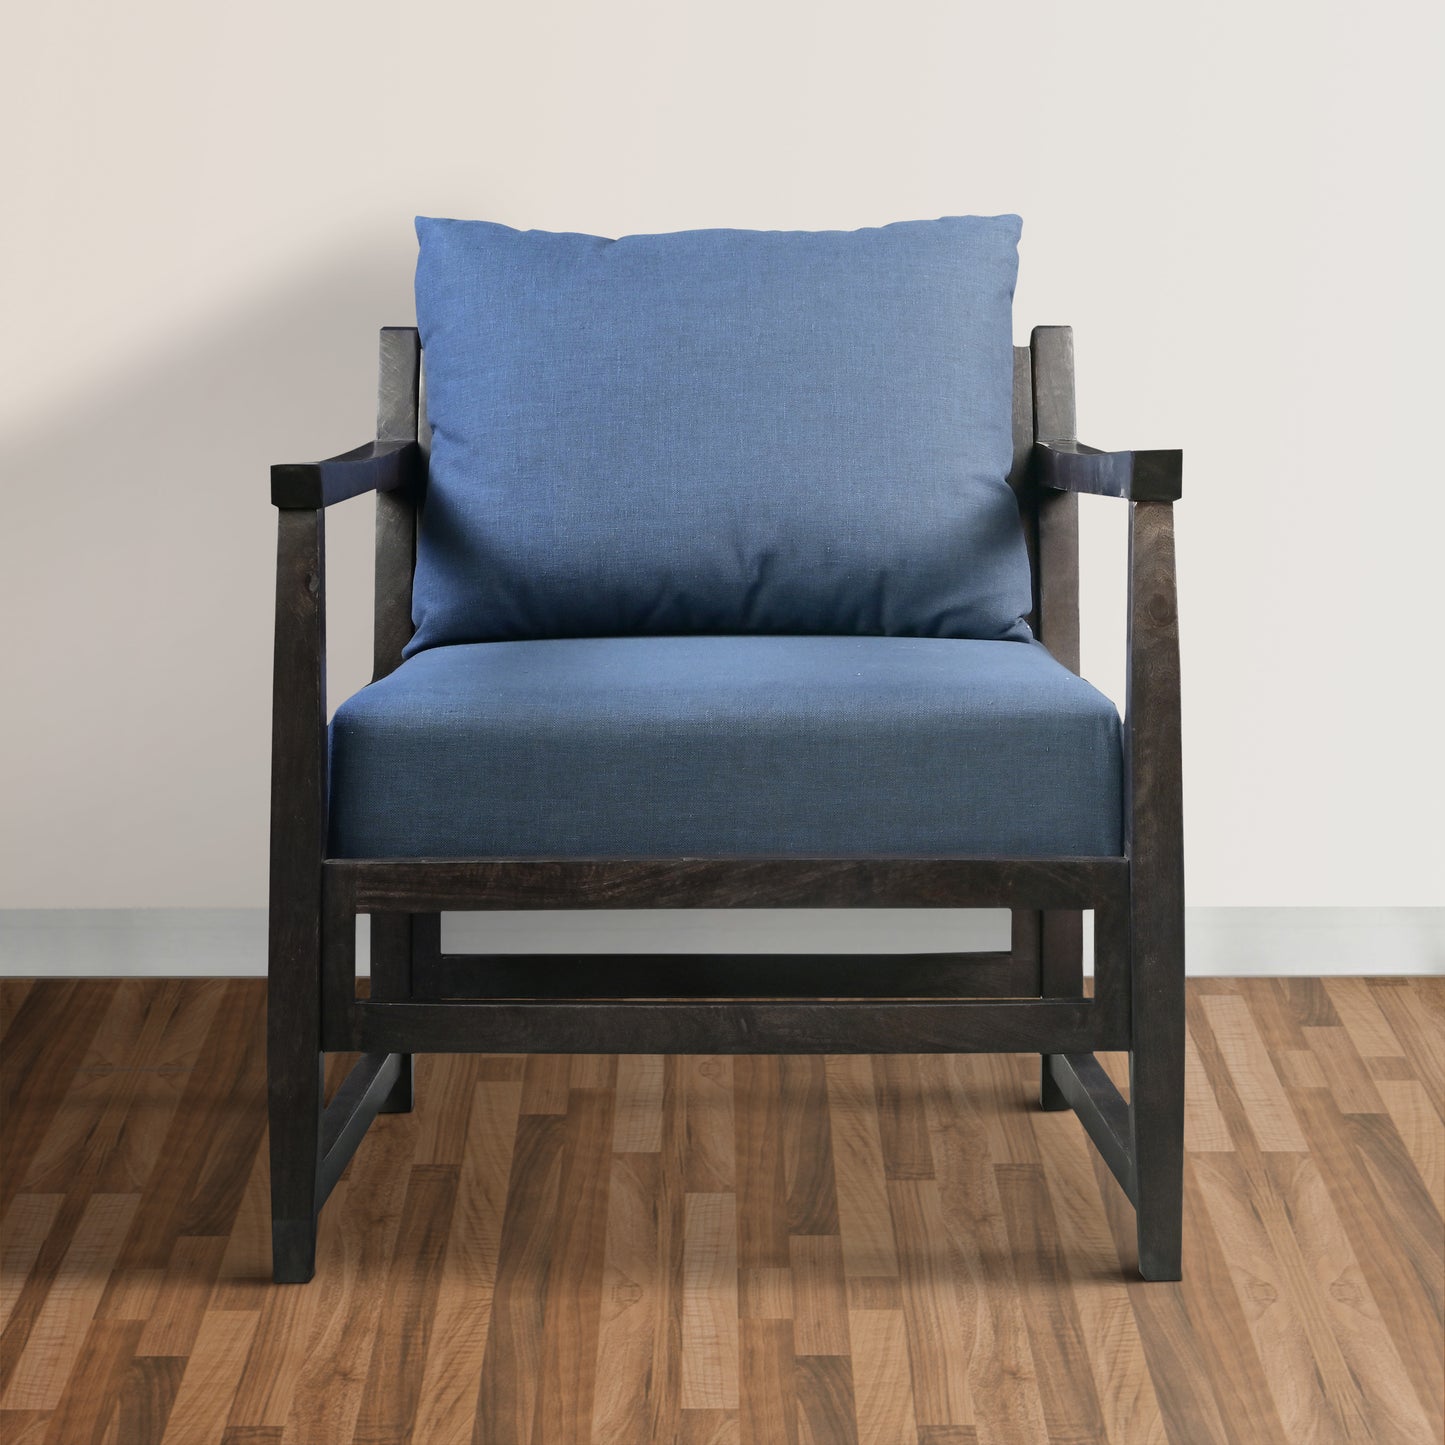 Malibu 27 Inch Handcrafted Mango Wood Accent Chair, Fabric, Pillow Back, Open Frame, Blue, Black By The Urban Port